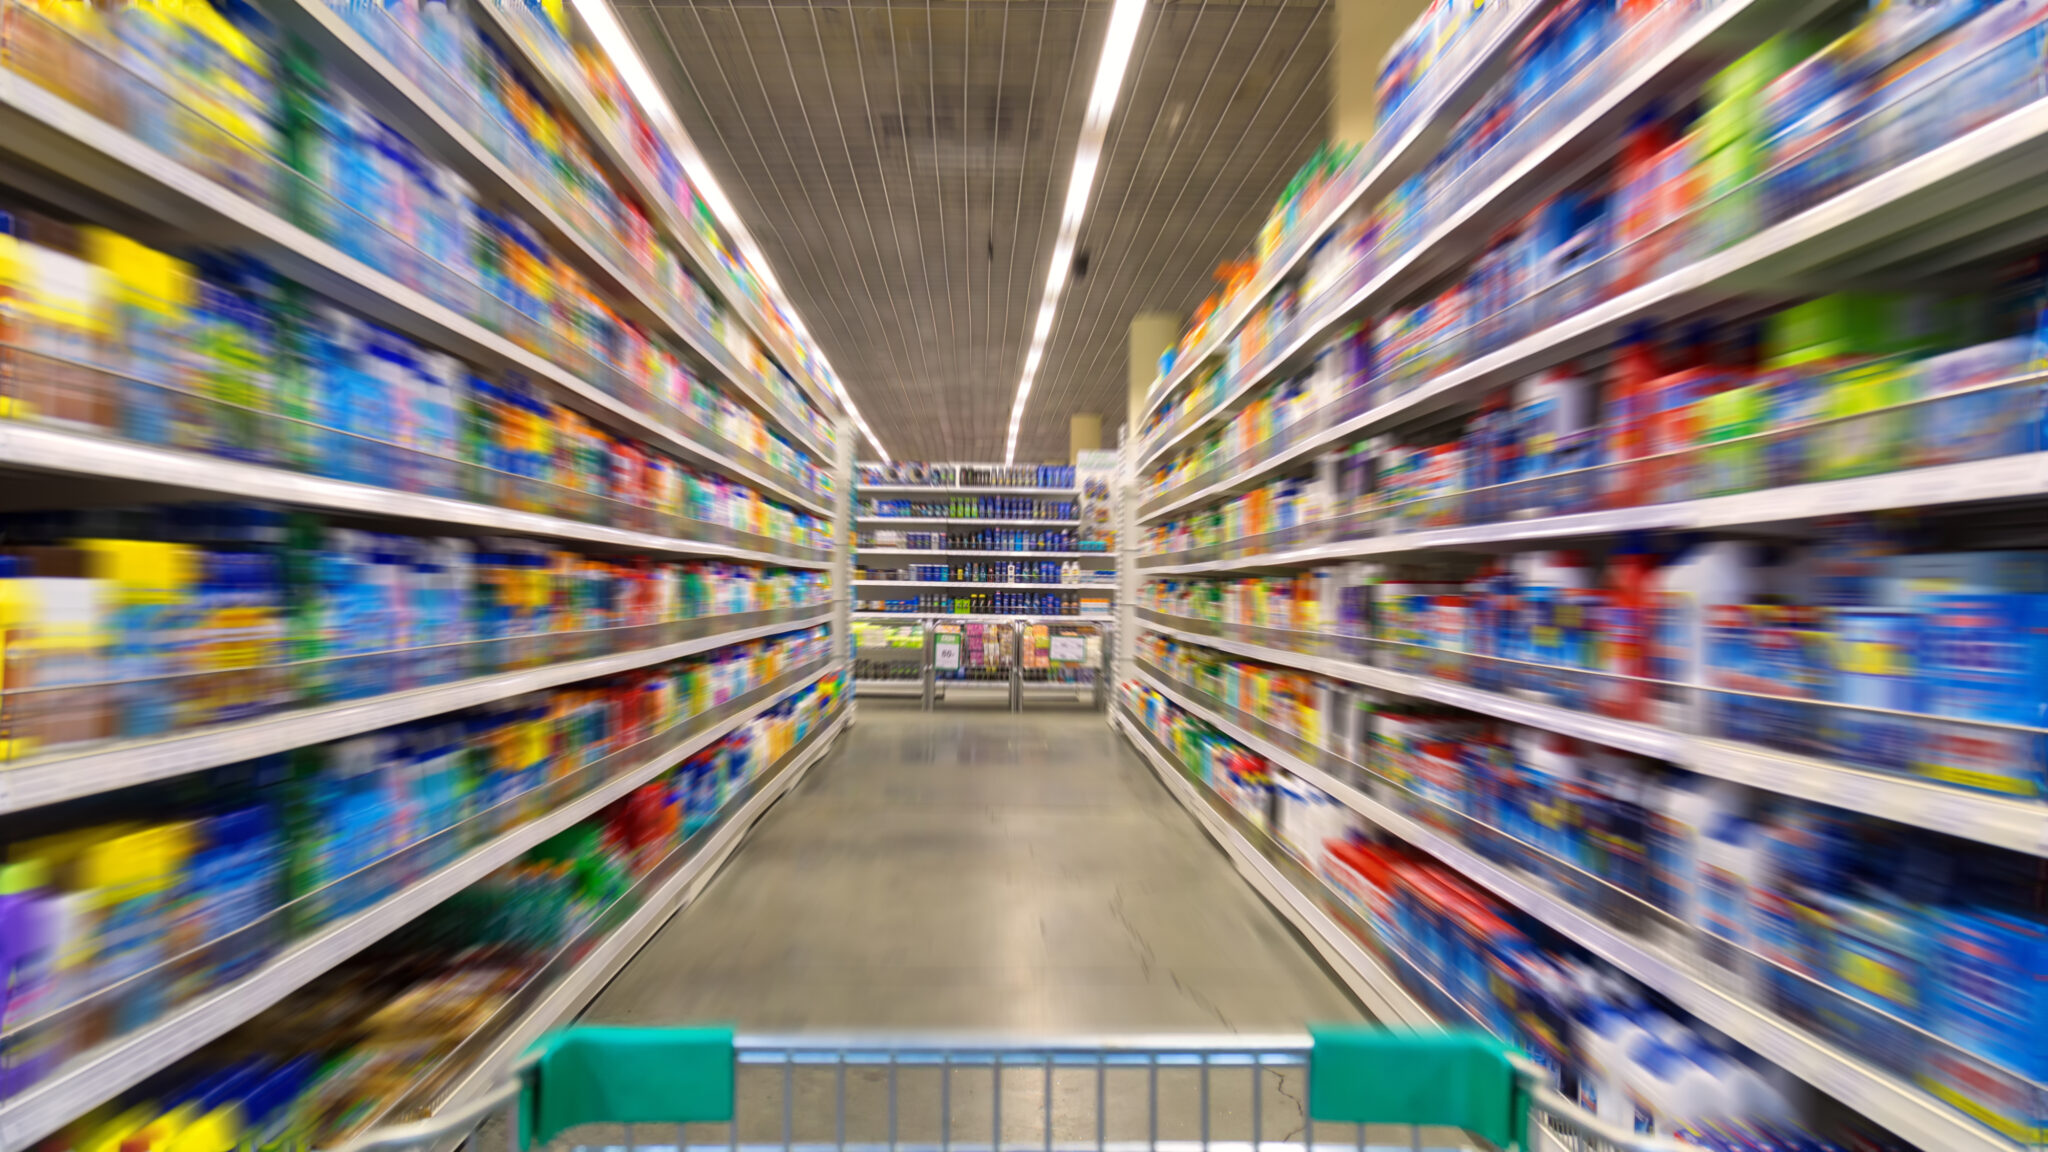 Shopping Cart View on a Supermarket Aisle and Shelves - Image Has a